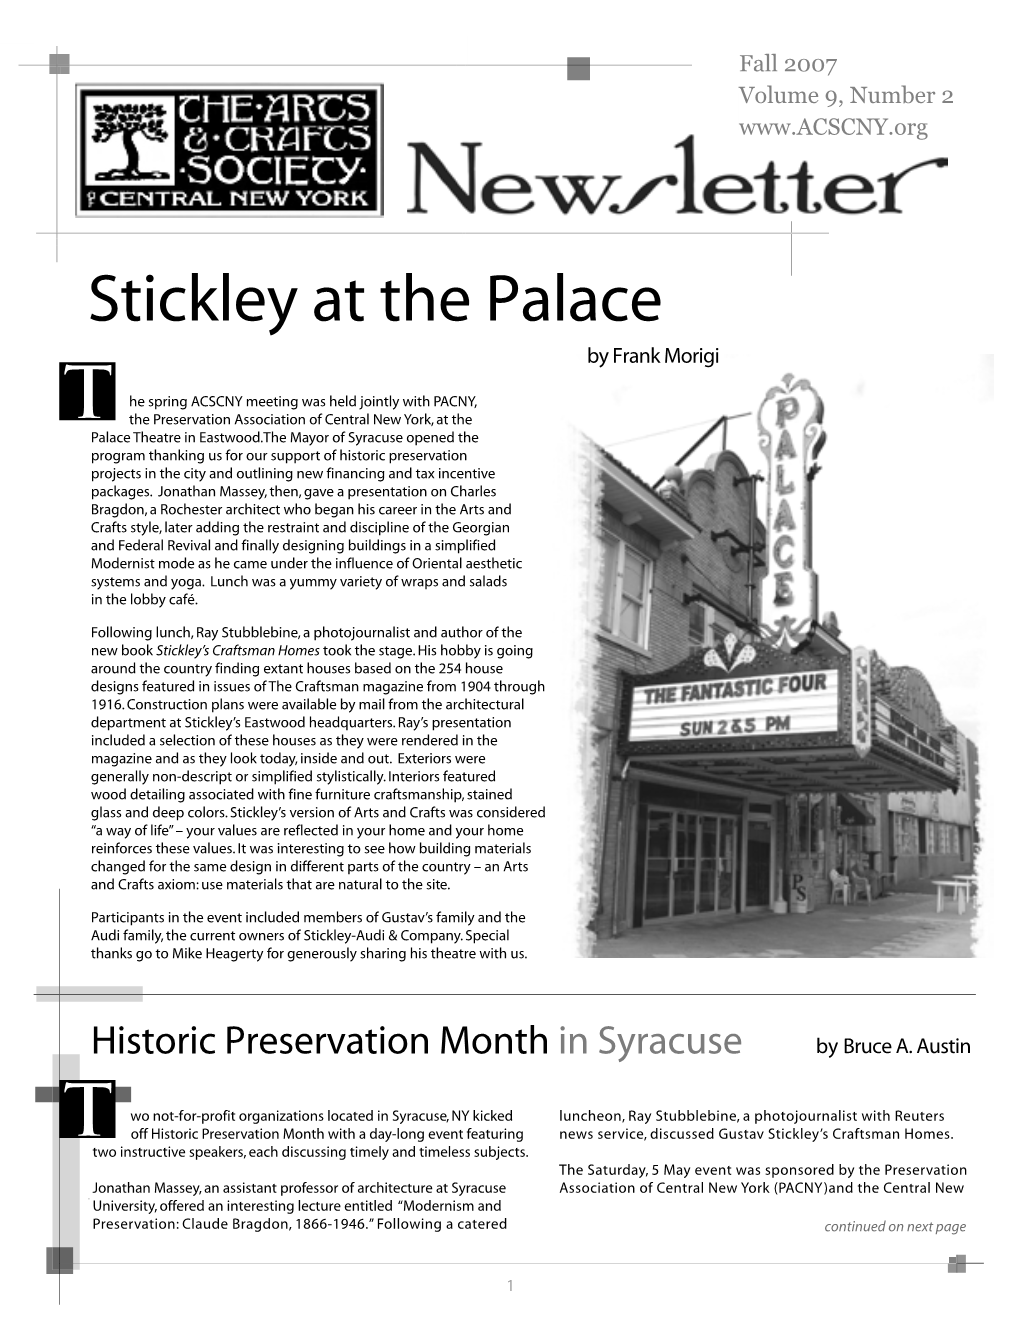 Stickley at the Palace by Frank Morigi